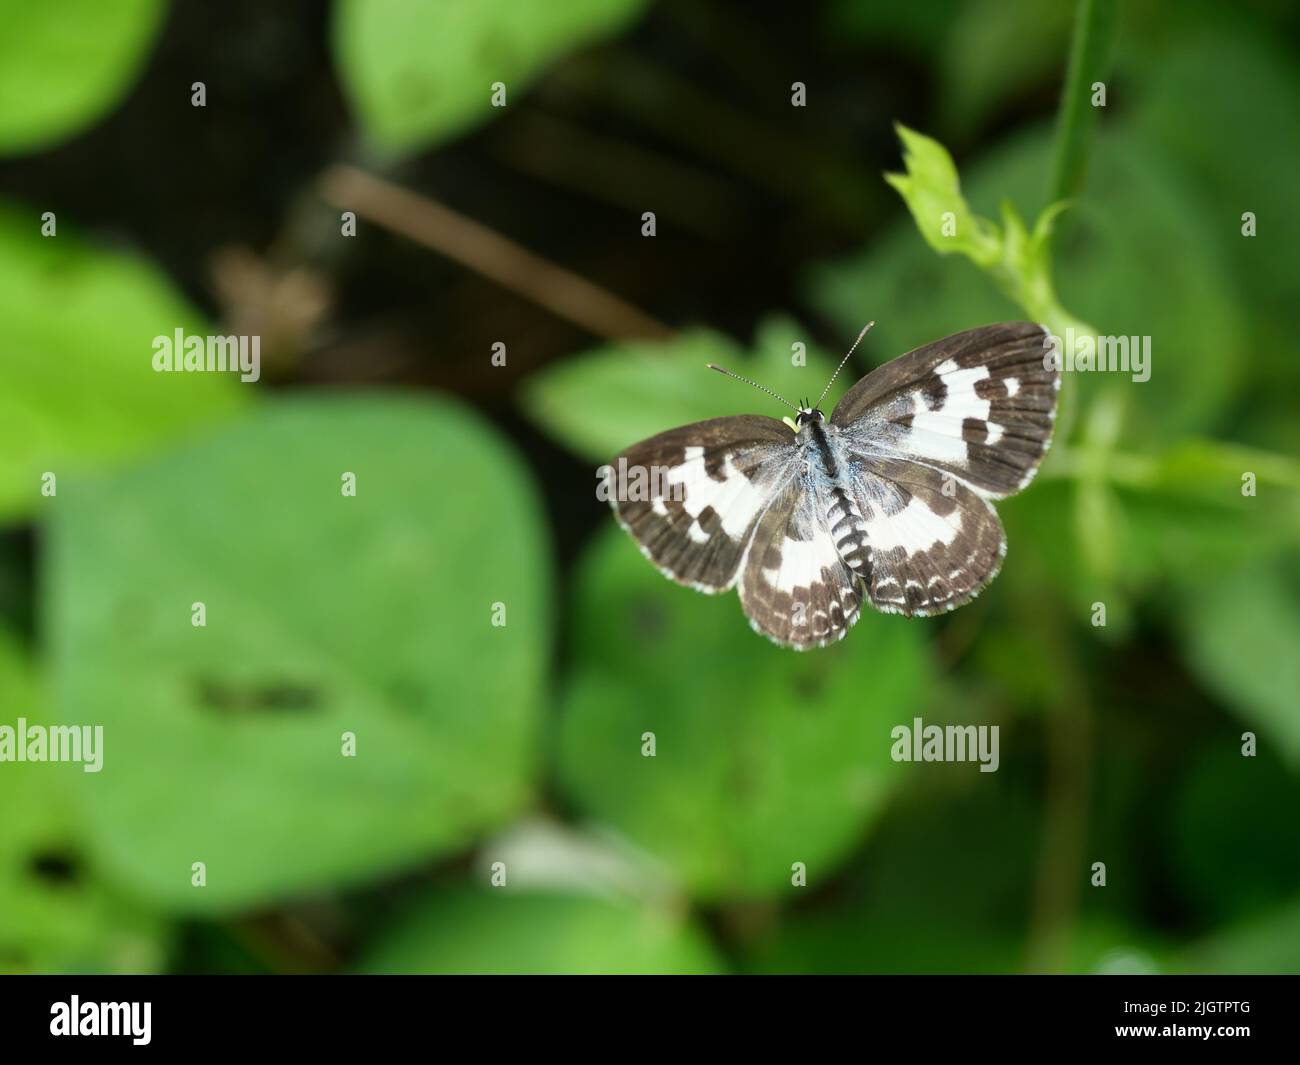 Common Pierrot butterfly with natural  green background , Stripes and brown spots on white wings of insect, Thailand Stock Photo